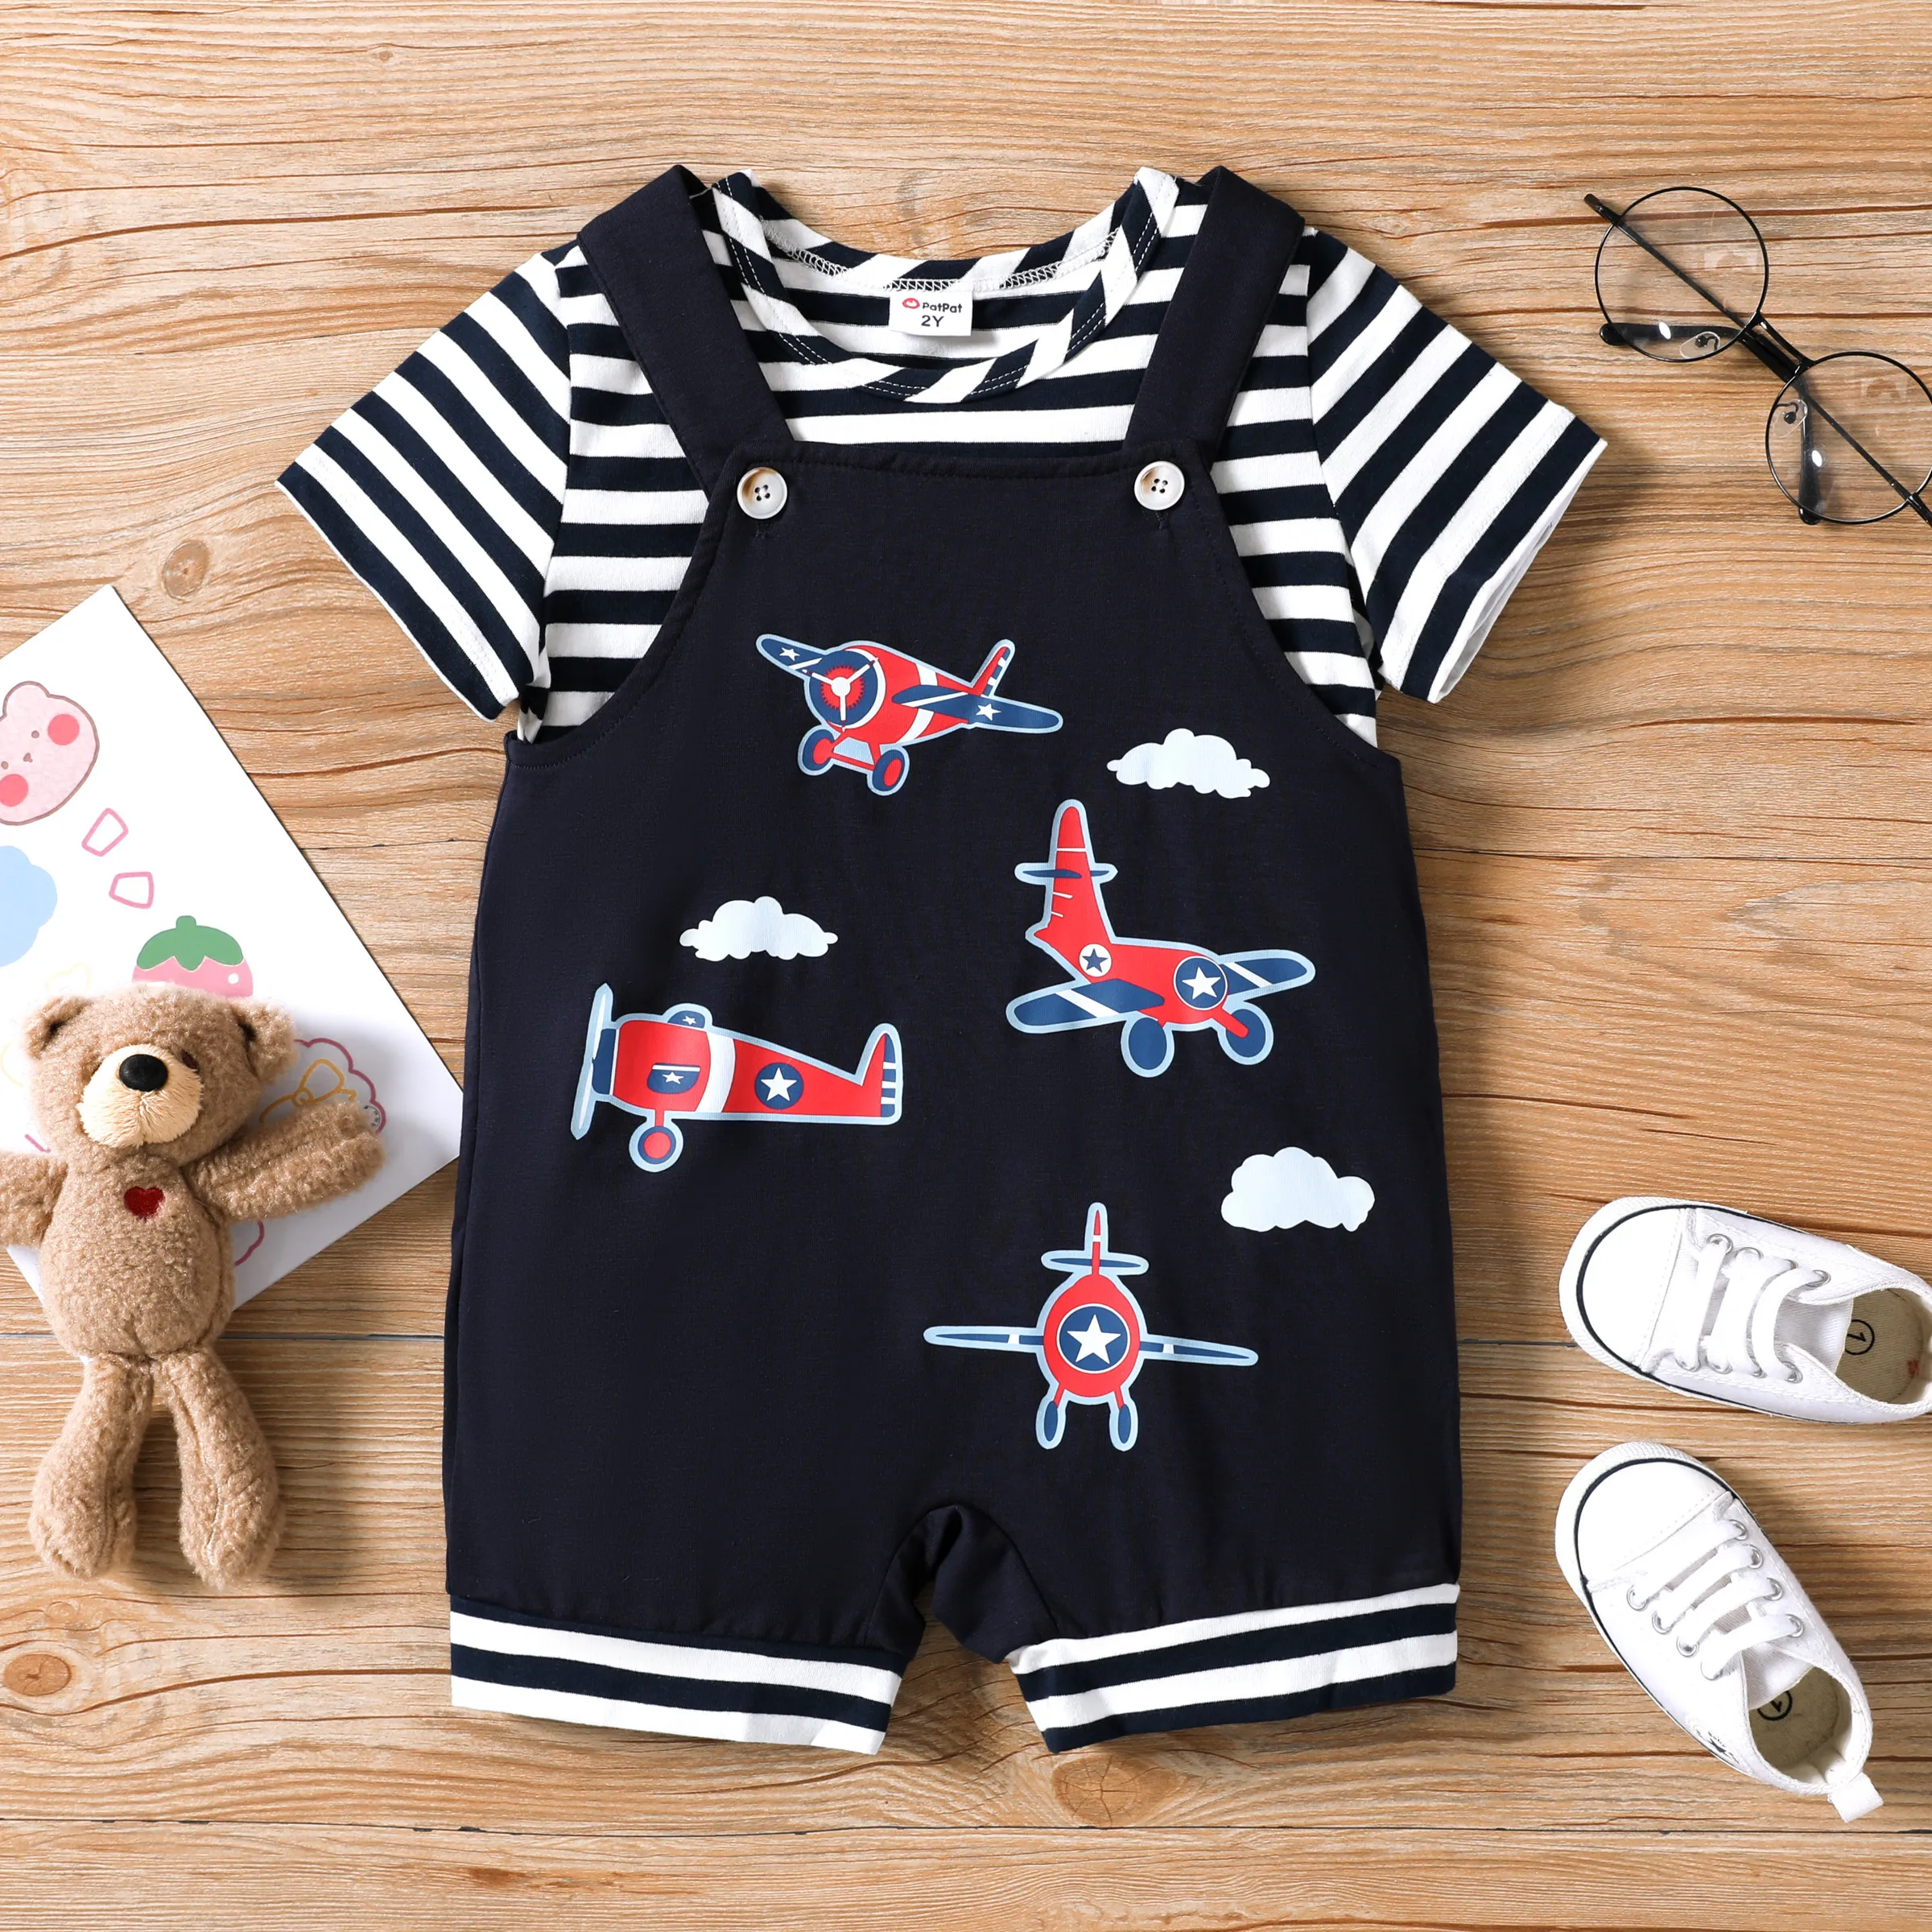 Toddler Boy 2pcs Striped Tee and Plane Print Overalls Shorts Set